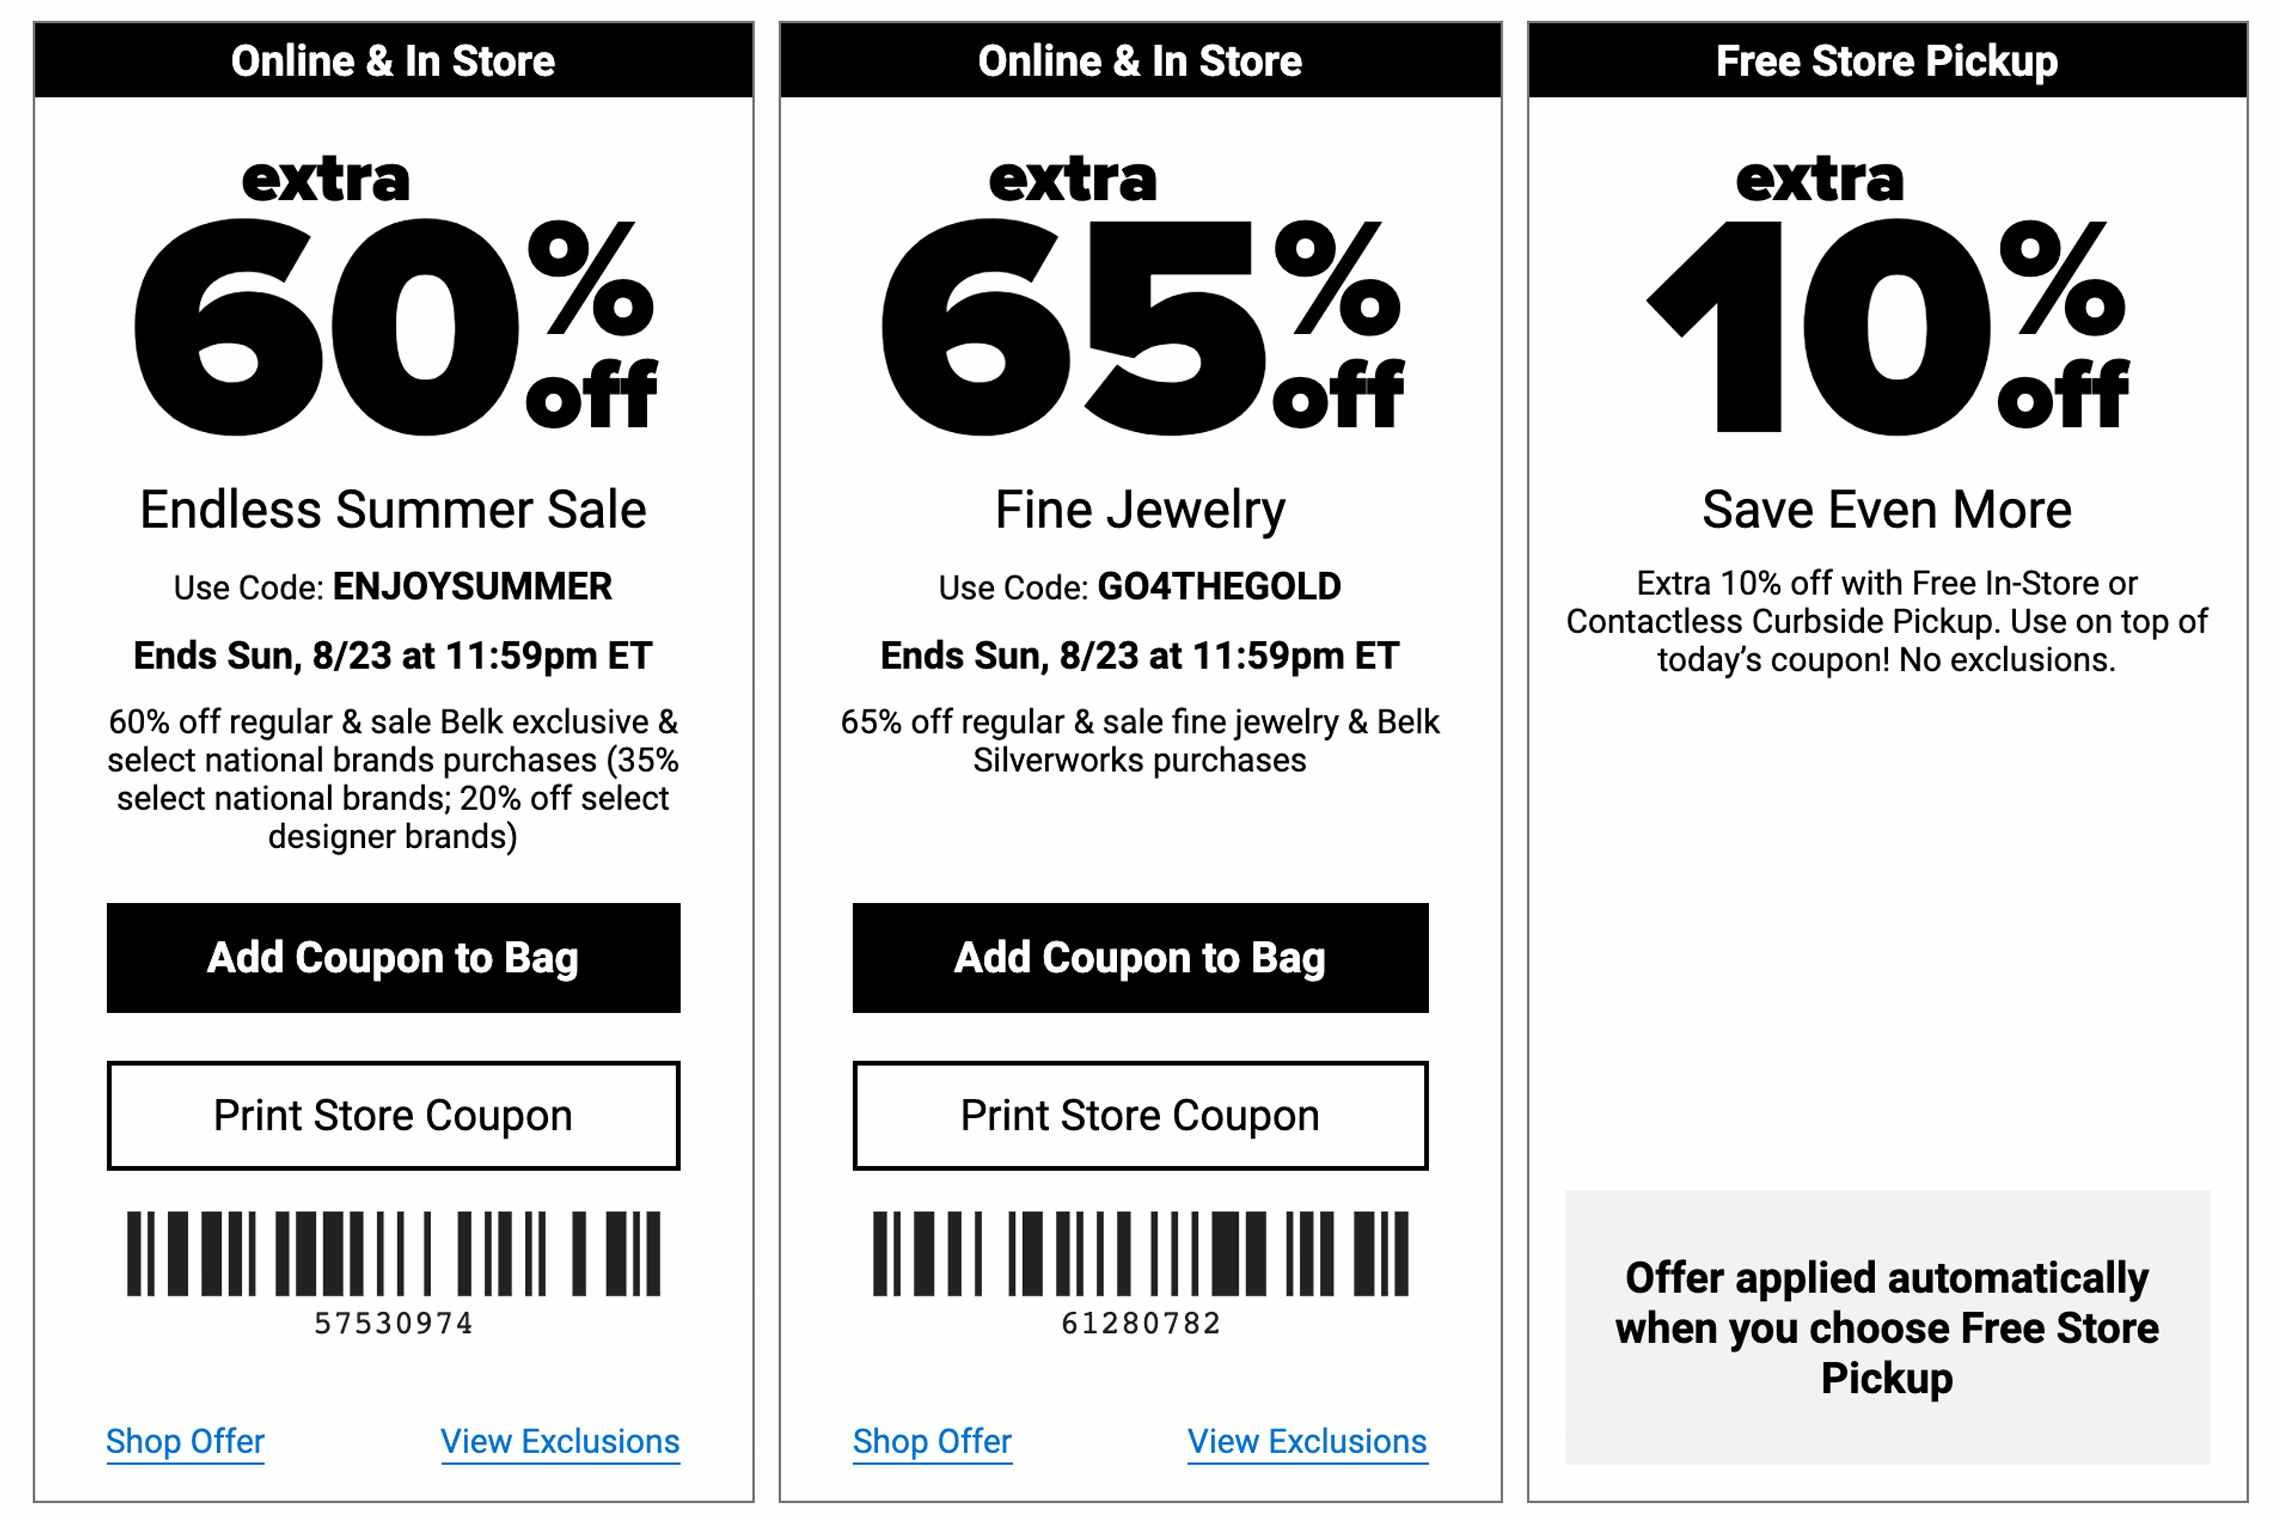 17 Belk Coupon Shopping Tips to Save You Money Online and in Store